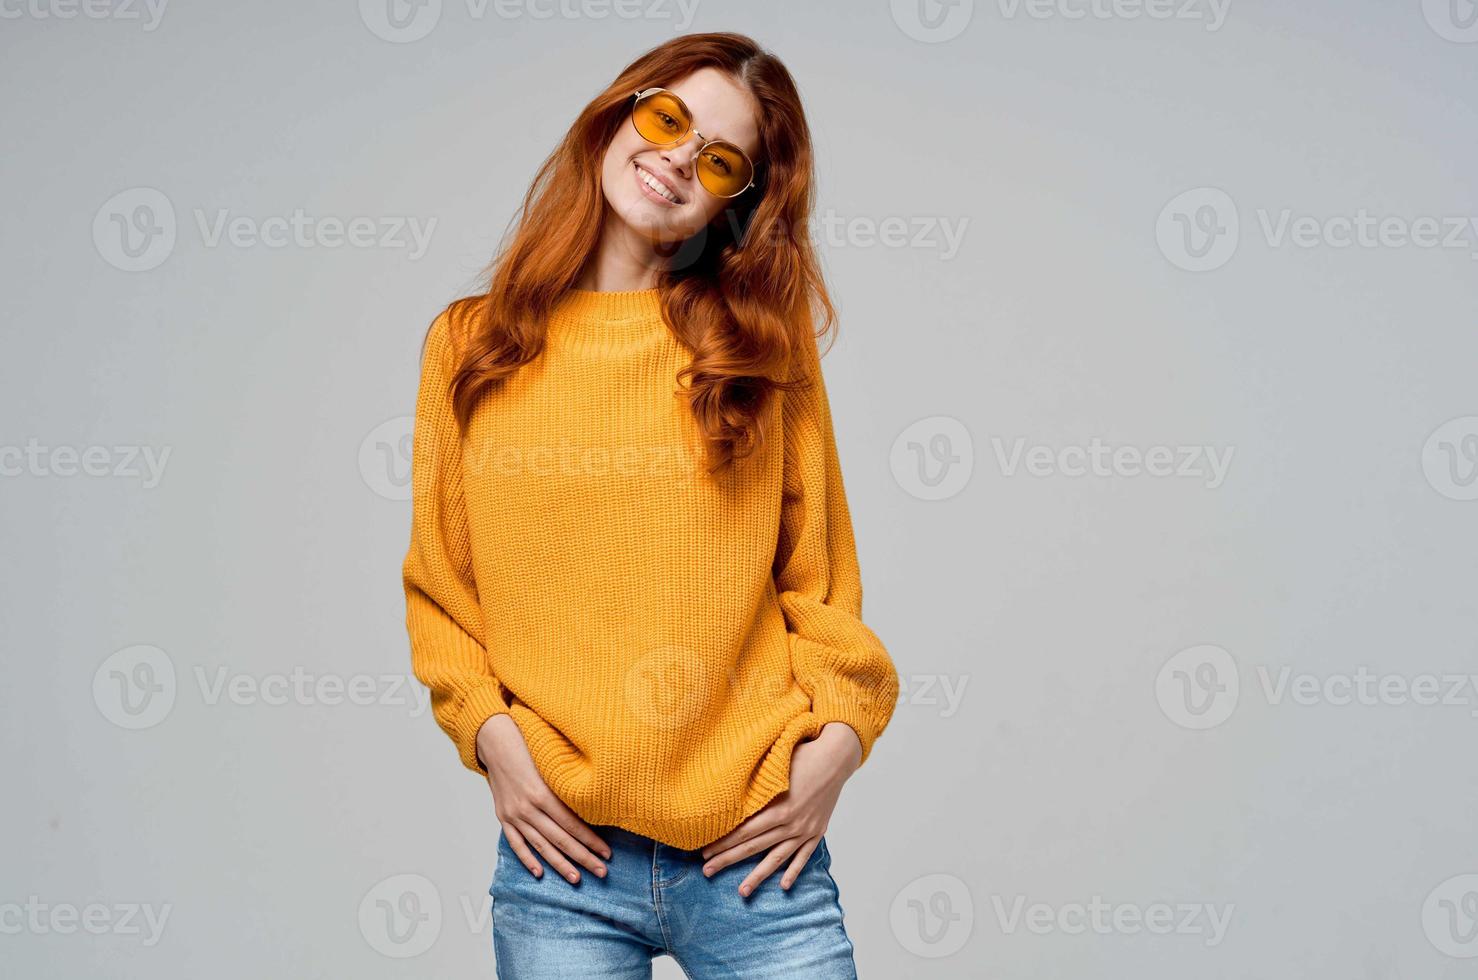 red-haired woman in yellow glasses posing fun lifestyle studio model photo